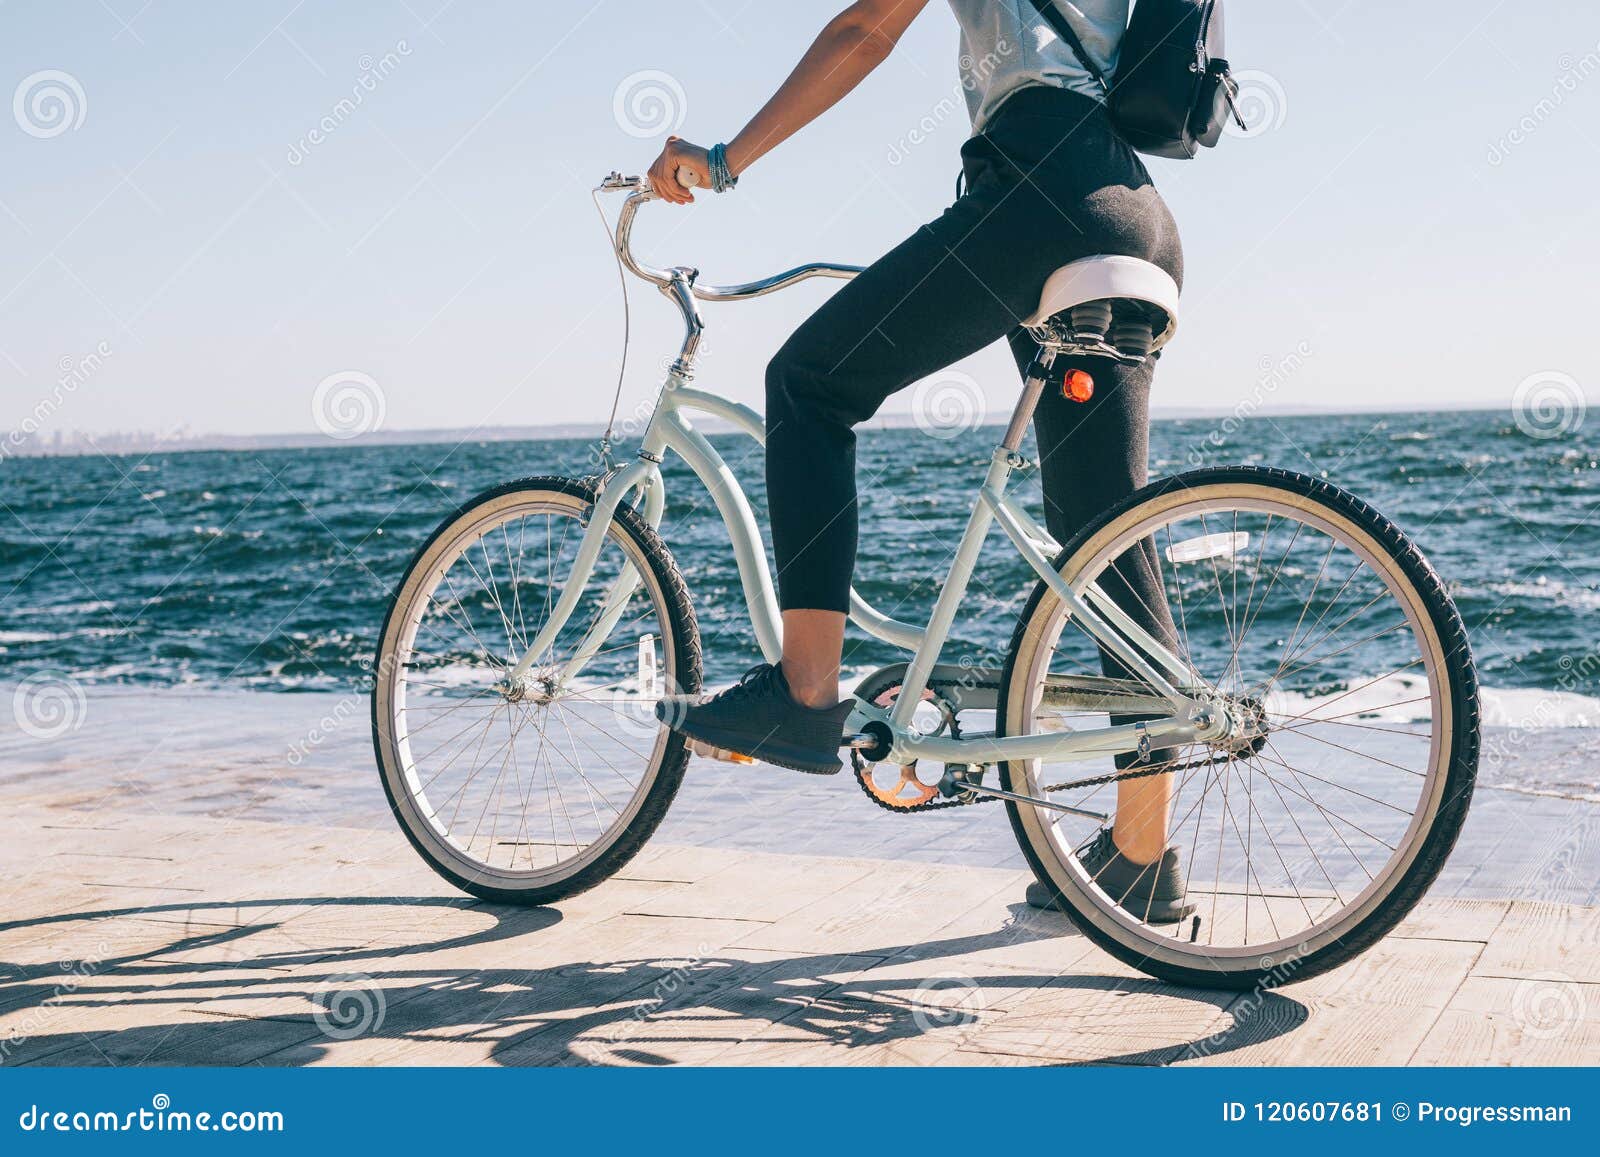 Rear View Young Woman Stopped during a Bike Stock Image - Image of ride ...